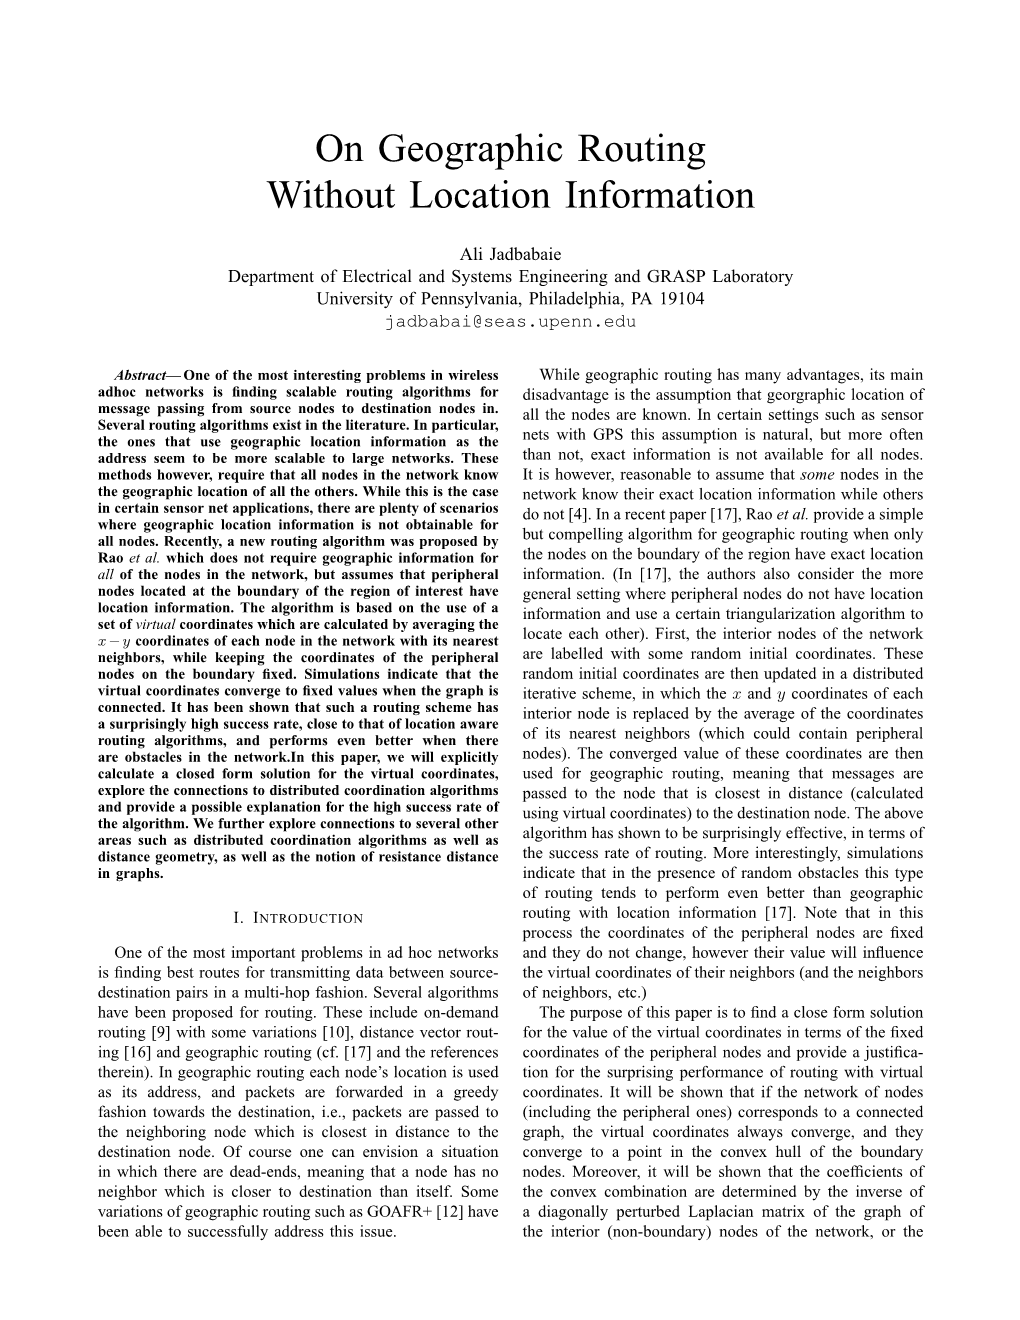 On Geographic Routing Without Location Information